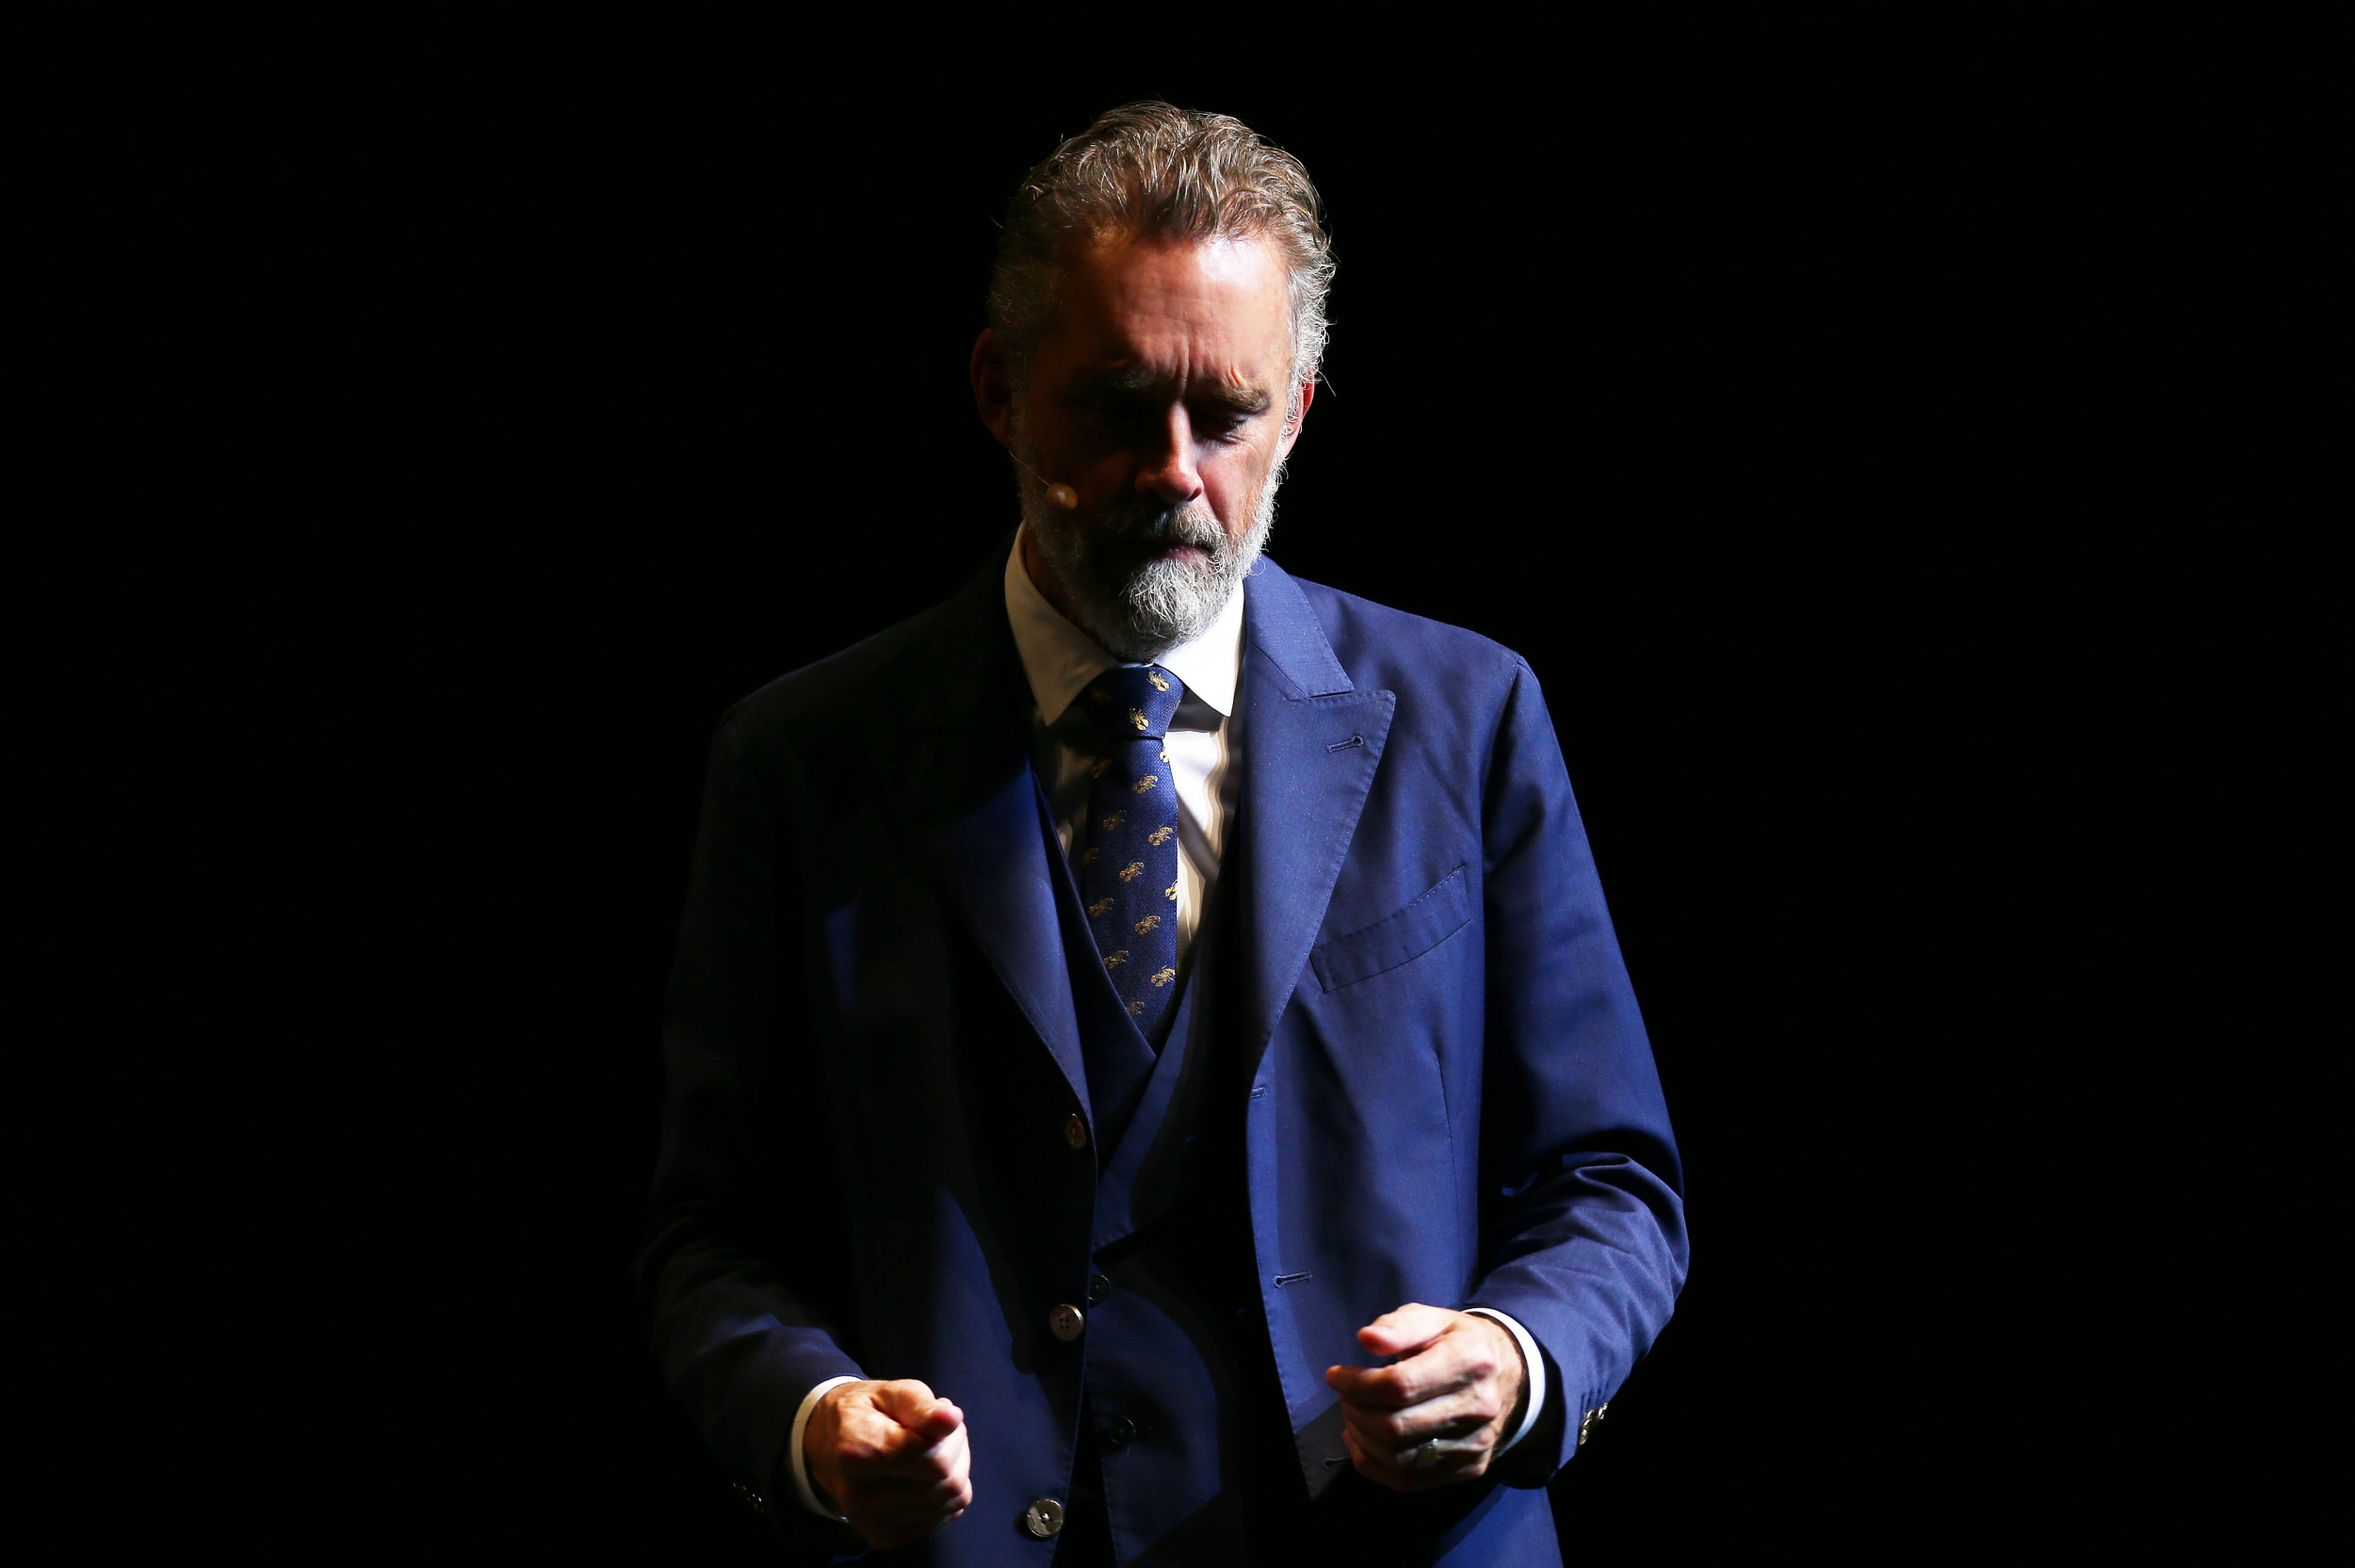 We must stand our ground on pronouns: Jordan Peterson picked the right fight